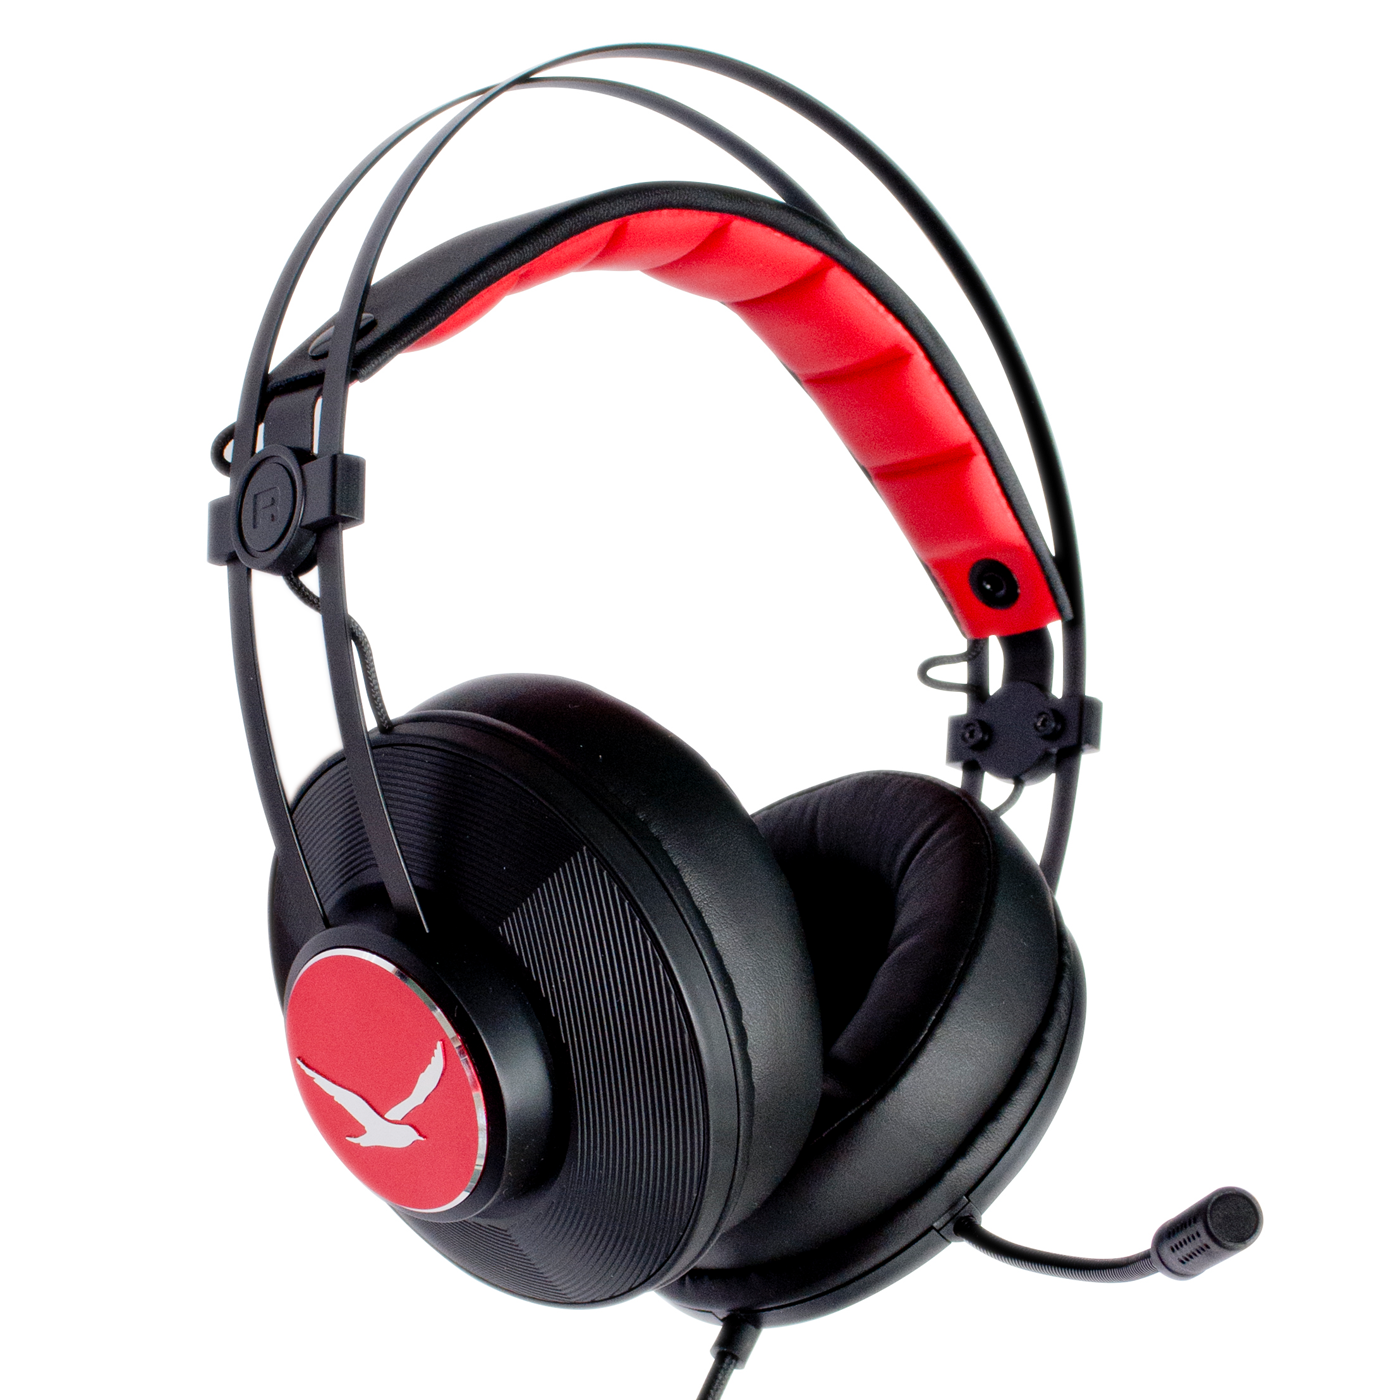 Digifast Headset Apollo Series X2, Lightweight, Noise-Canceling Adjustable Microphone, Remote Vol/Mic Control, Plug & Play, 3.5 mm audio jack